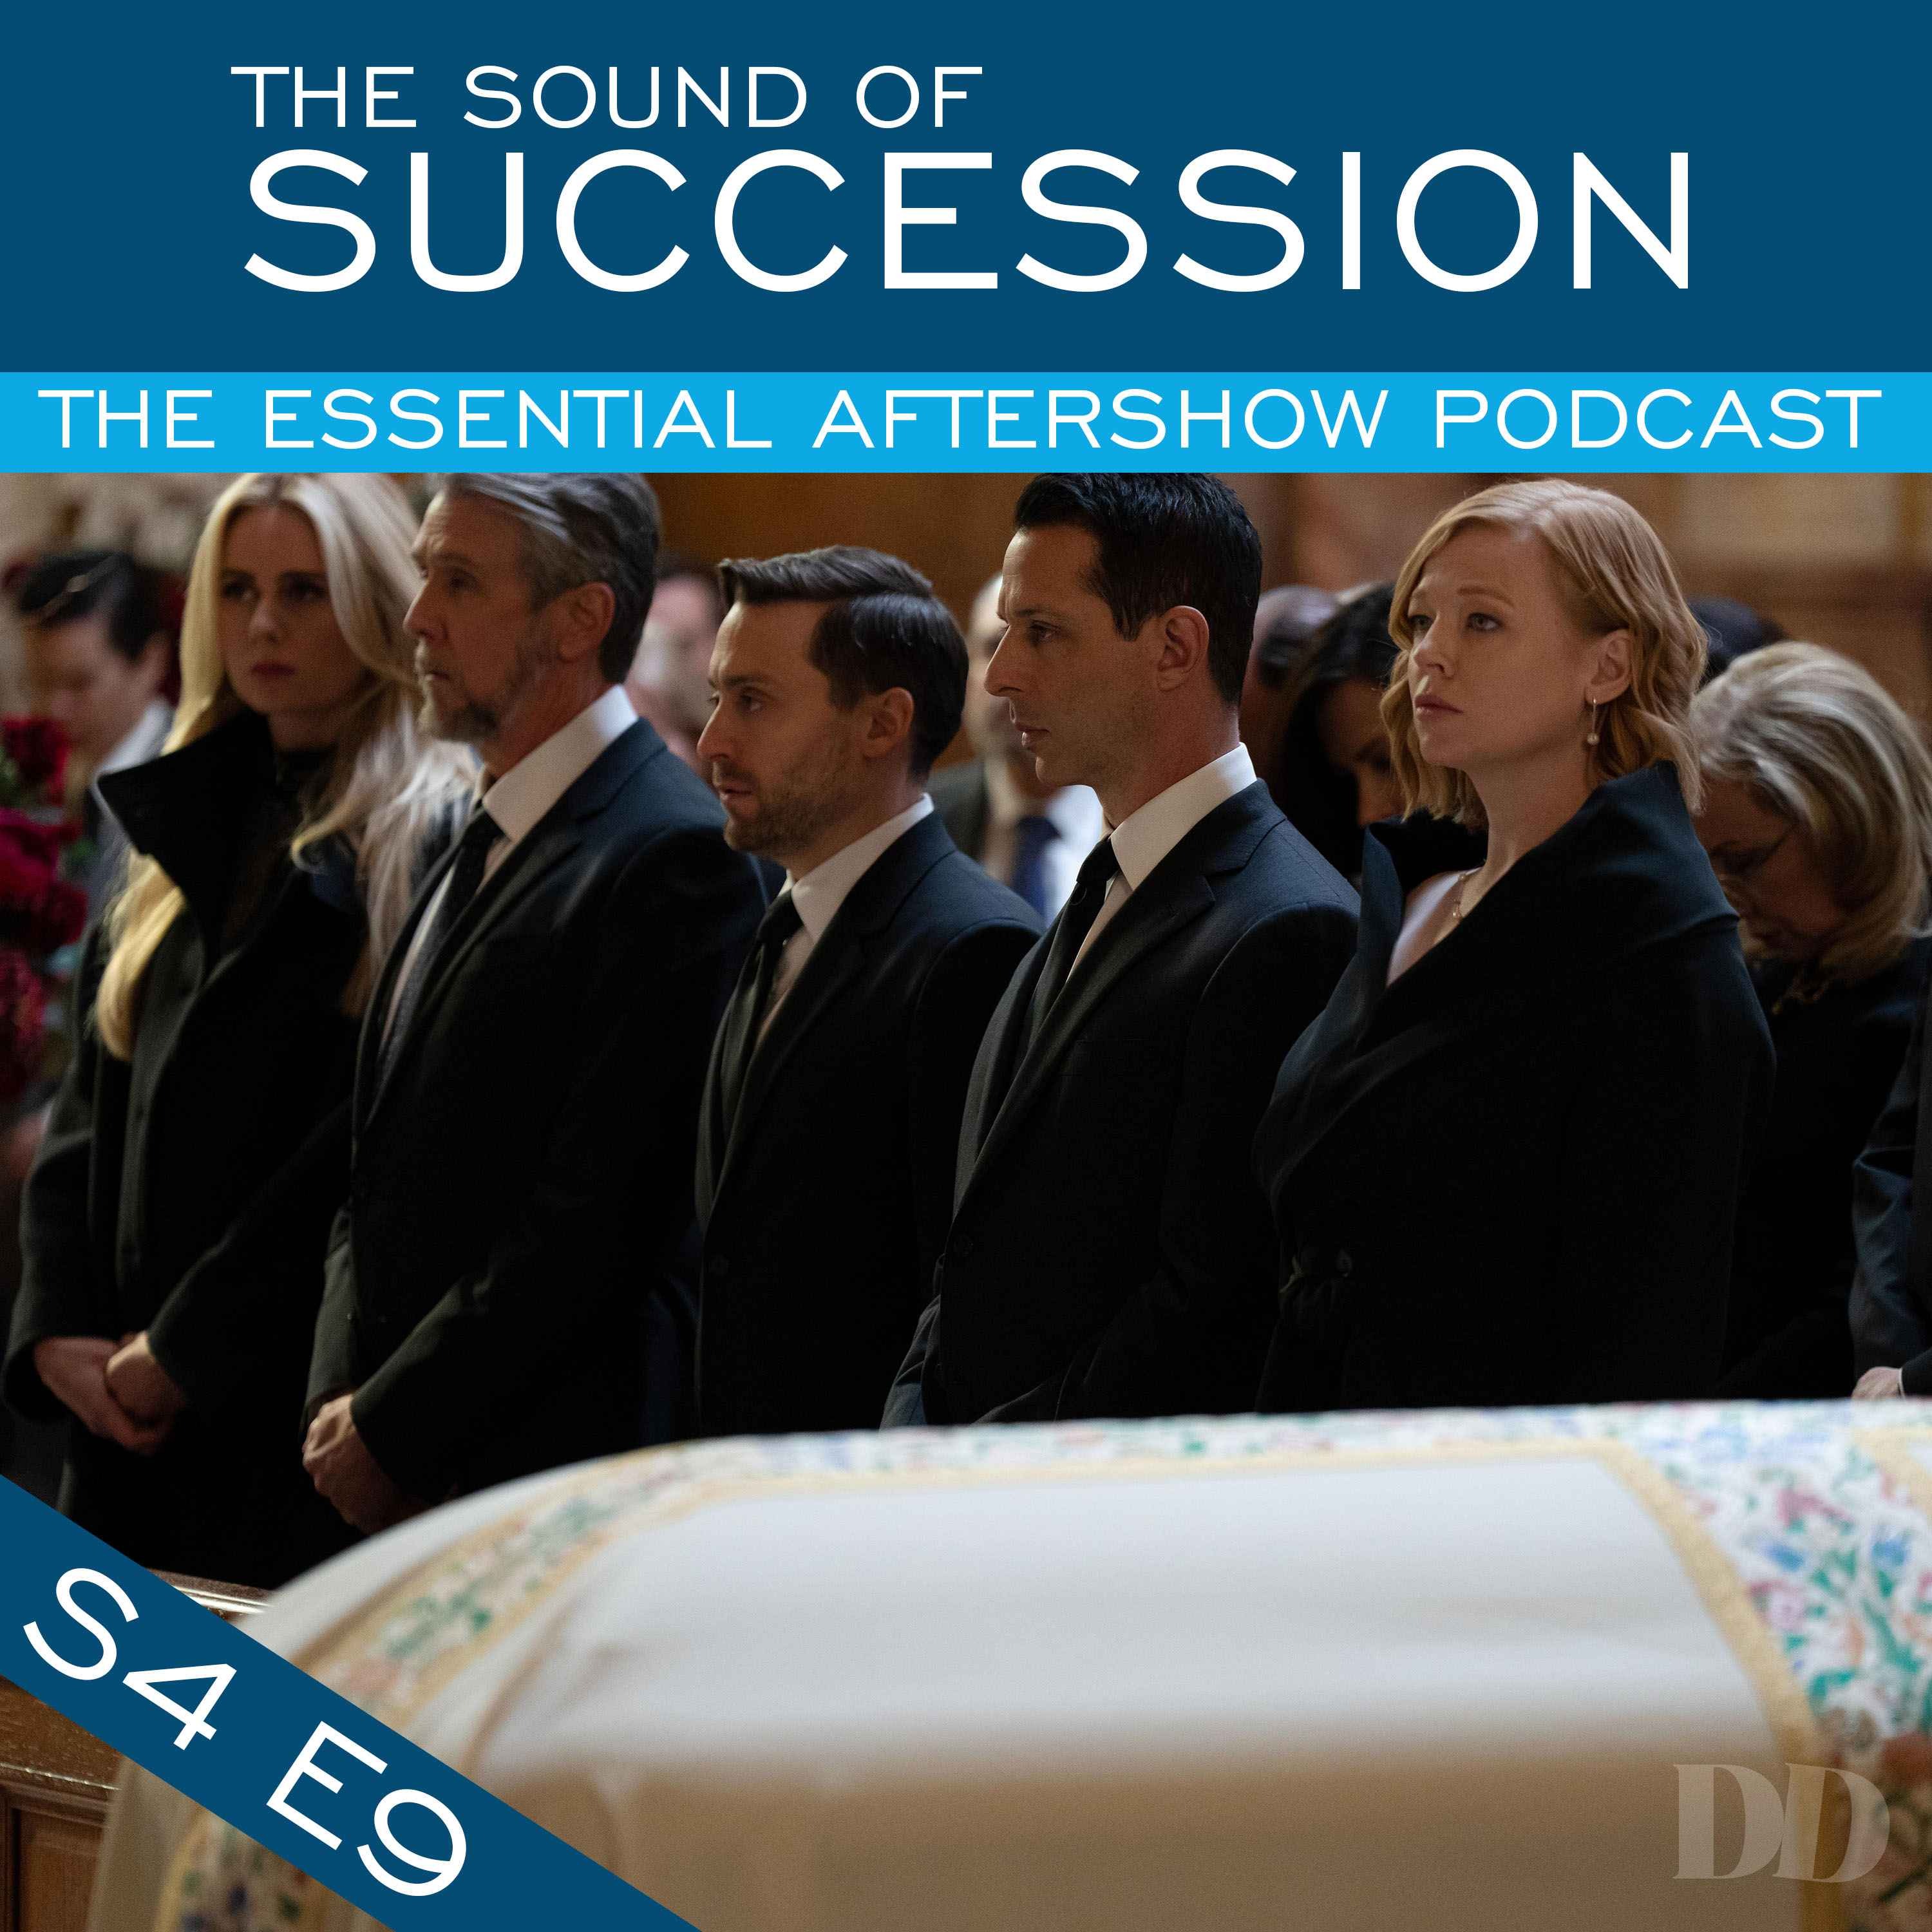 The Sound of Succession: Season 4 Episode 9 - Church and State